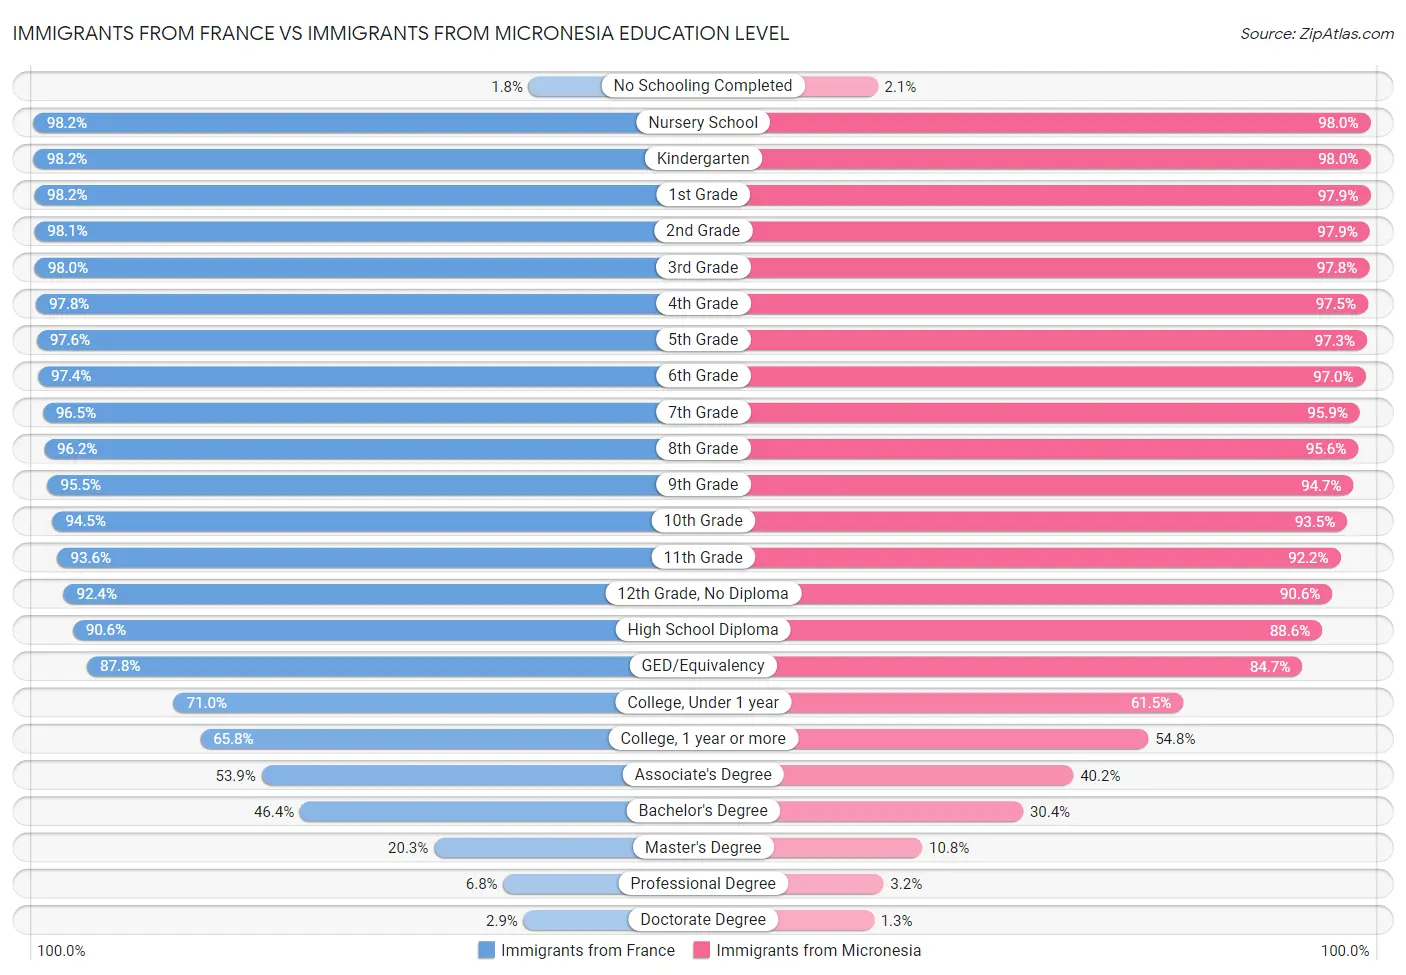 Immigrants from France vs Immigrants from Micronesia Education Level